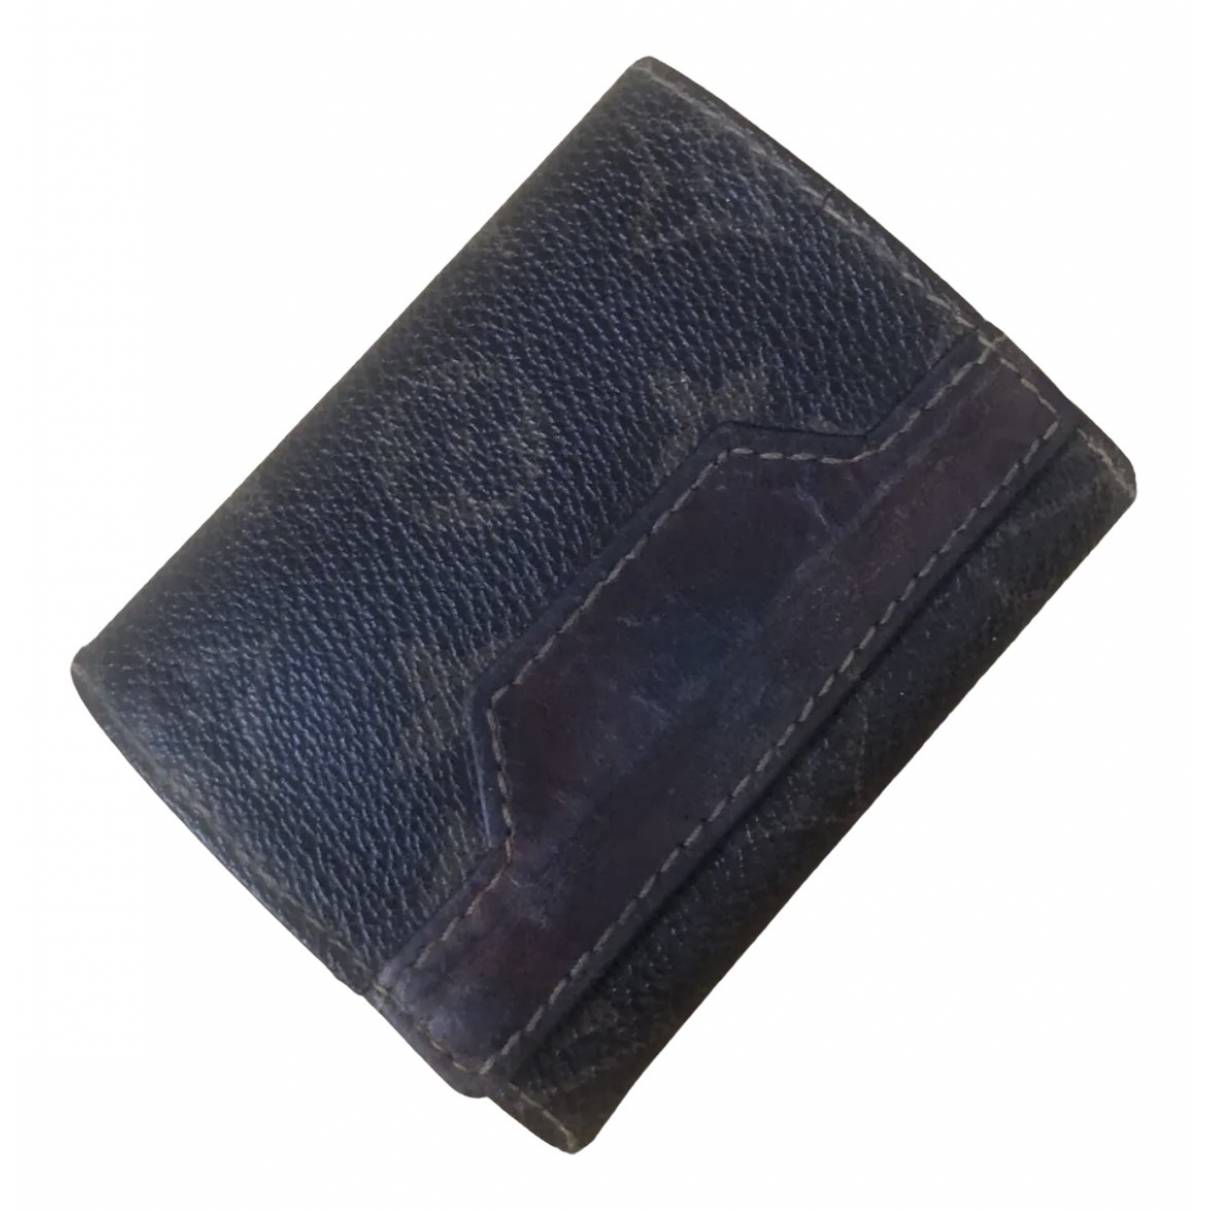 Louis Vuitton - Authenticated Coin Card Holder Small Bag - Leather Brown Plain for Men, Good Condition